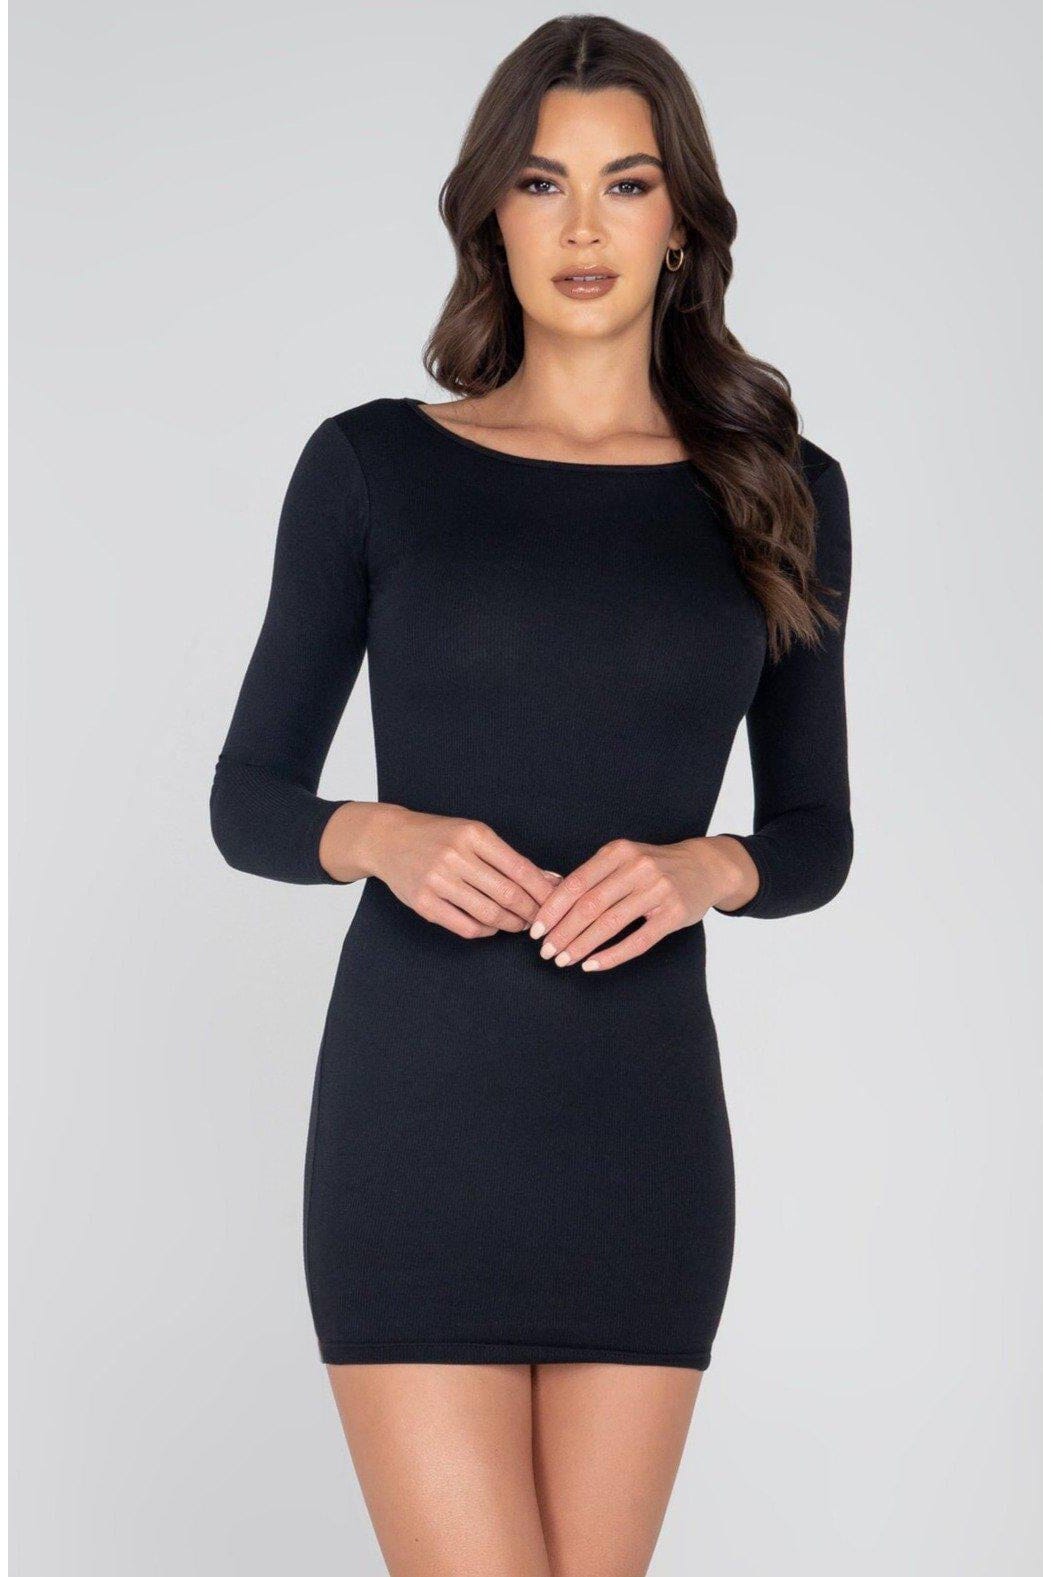 SS-Classic Ribbed Long sleeve Bodycon Dress-Clothing-Roma Brand-Black-S-SEXYSHOES.COM